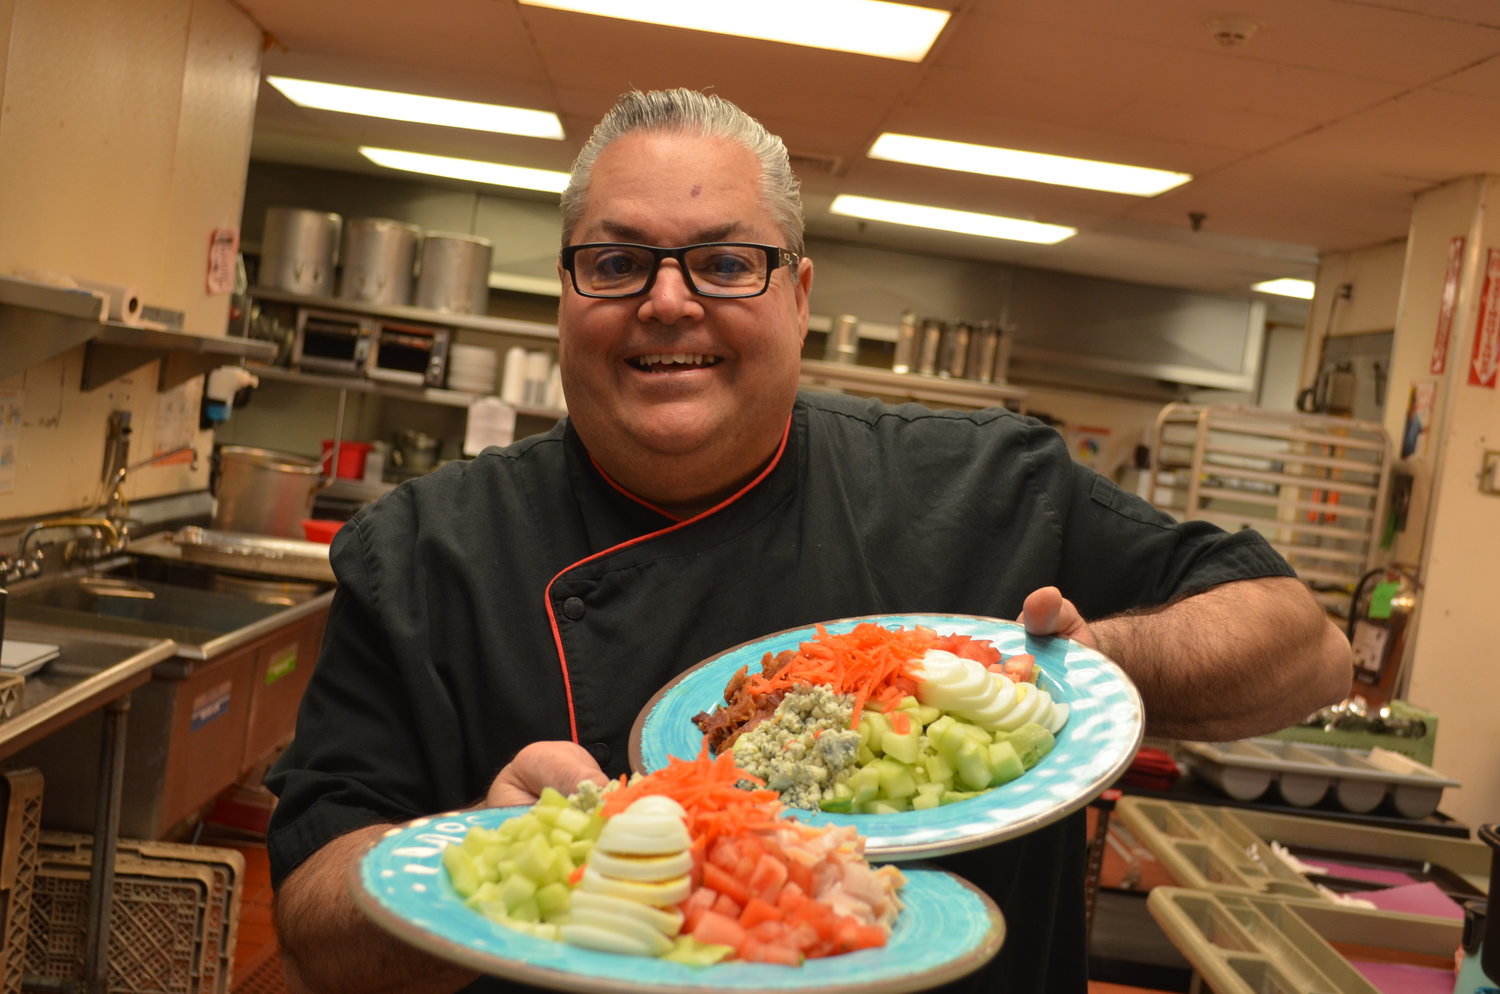 Patrick Marone, Executive chef of the Regency for 18 years, has returned to the assisted living community after a six-month absence.